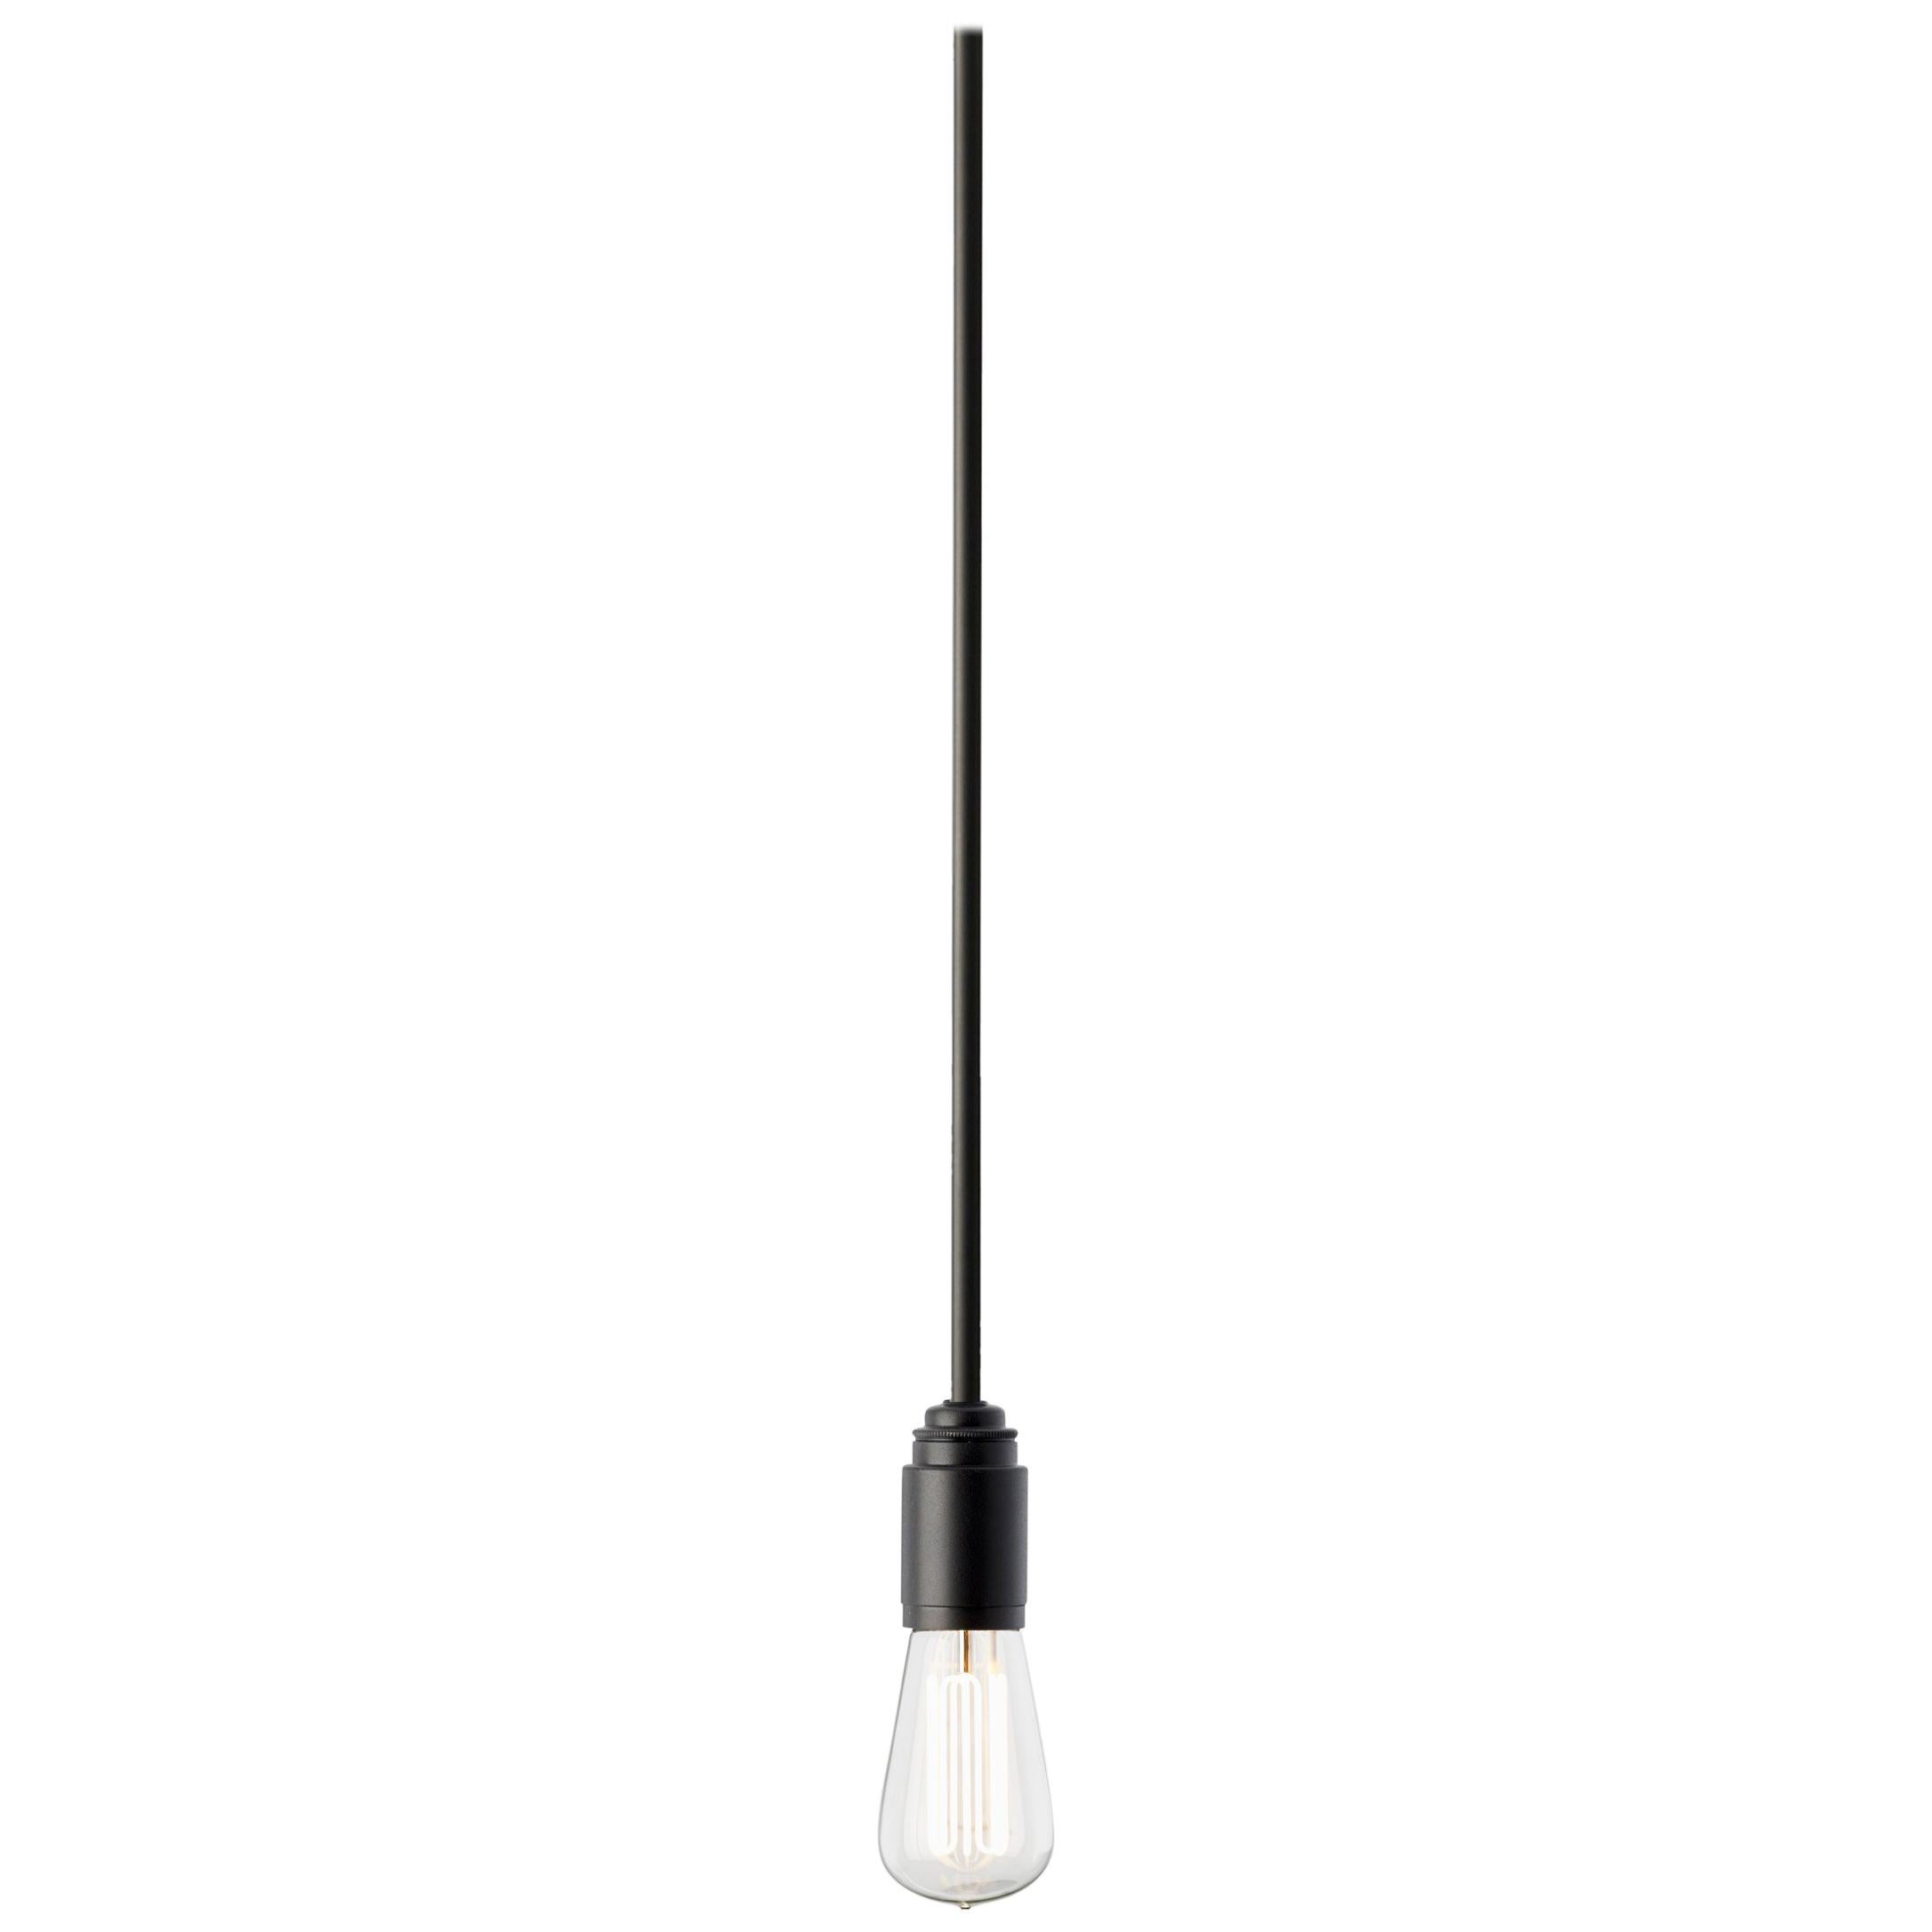 Tekna Thorn Pete Grip-C Pendant Light with Black Paint Finish and Ceiling Plate